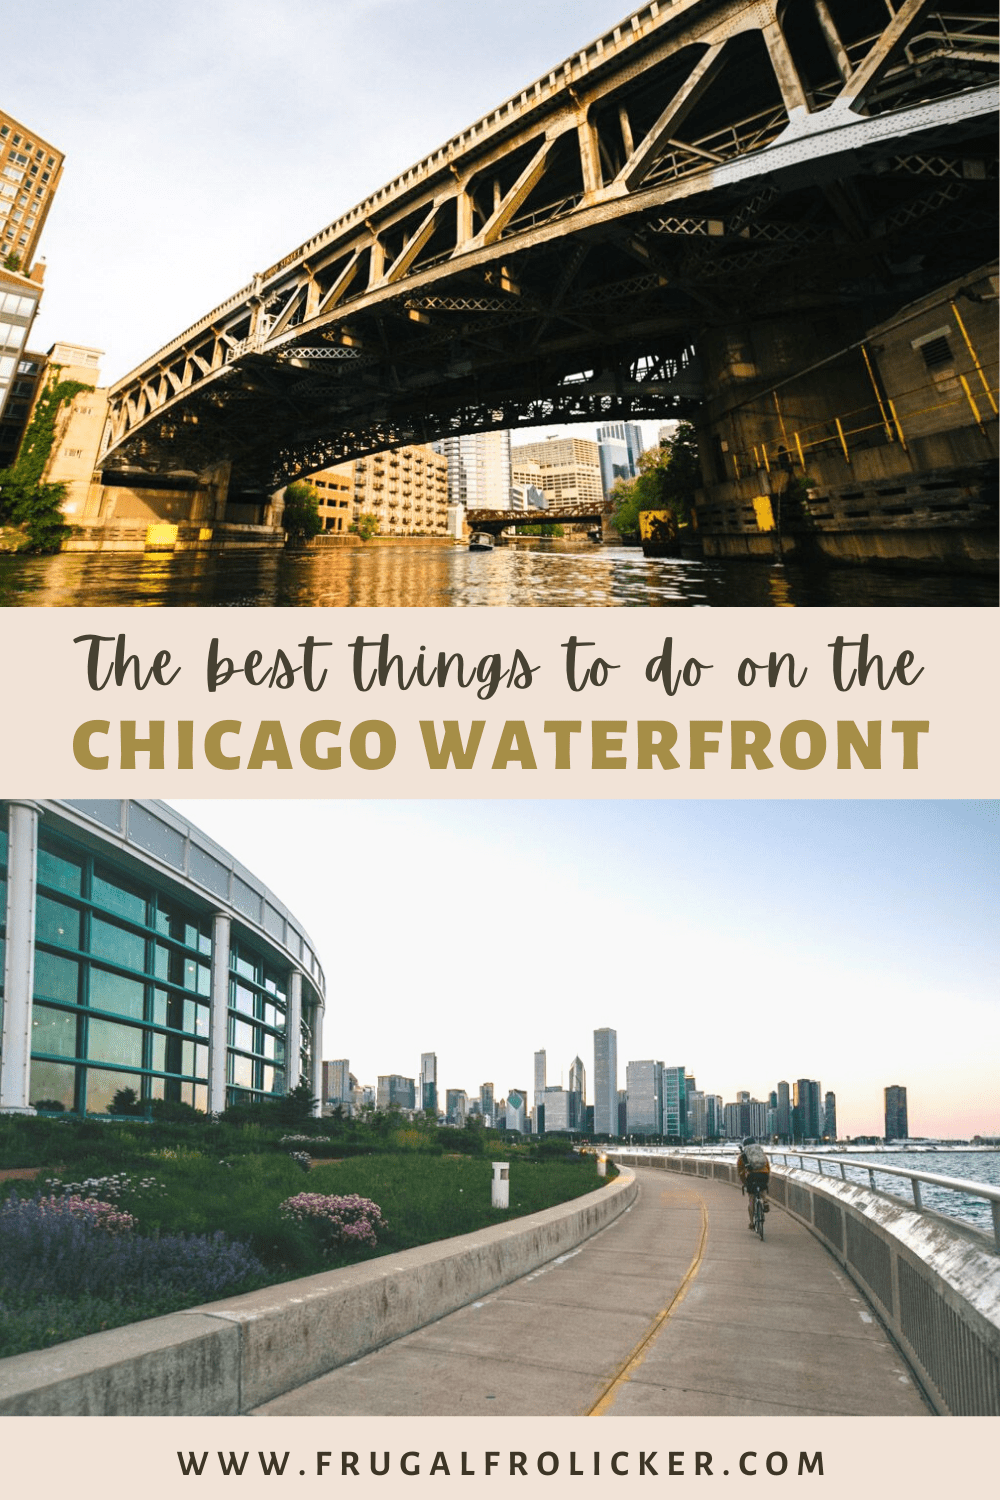 The Best Things To Do On The Chicago Waterfront